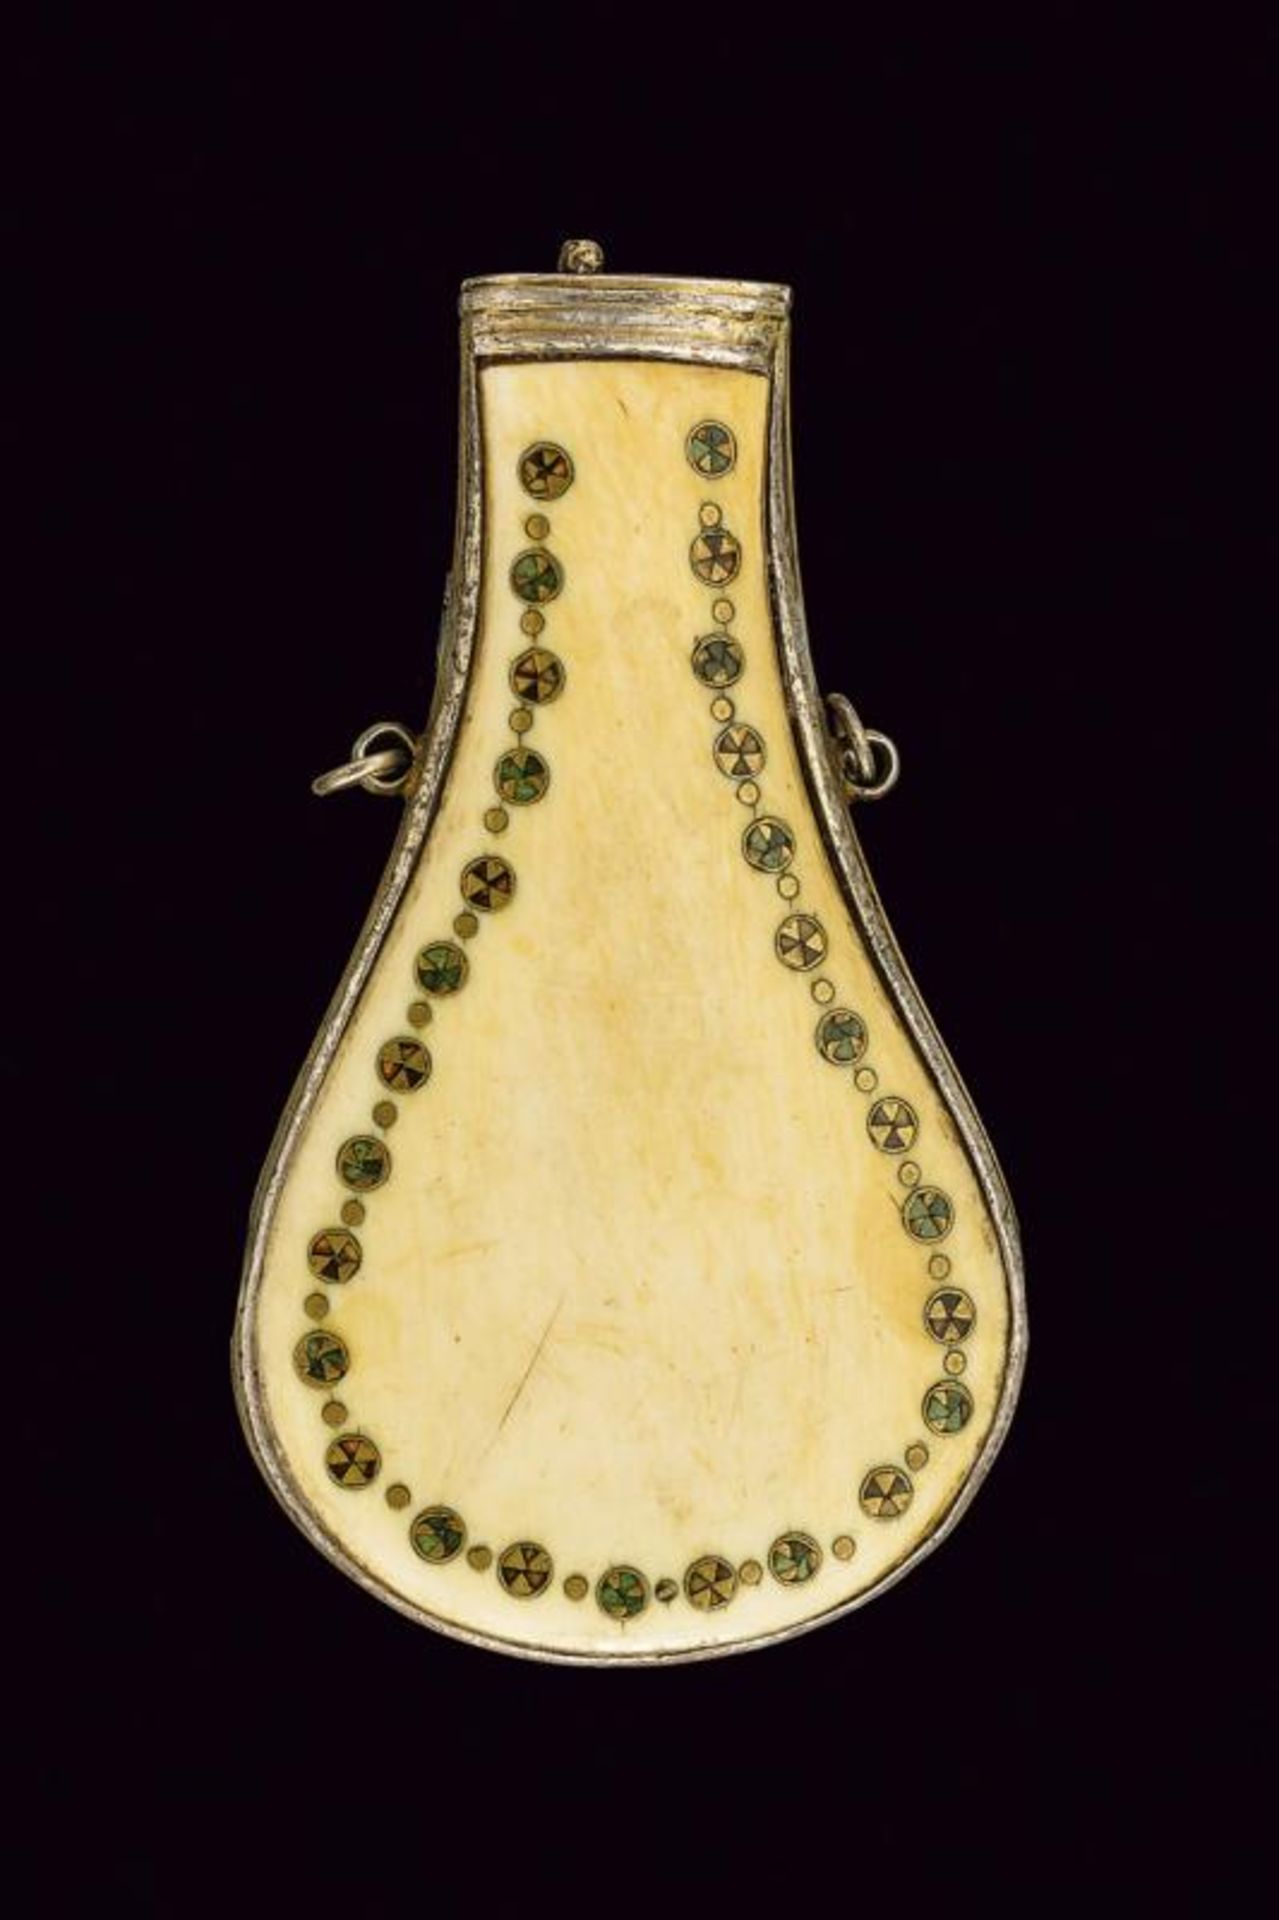 An ottoman rare decorated flask - Image 2 of 7